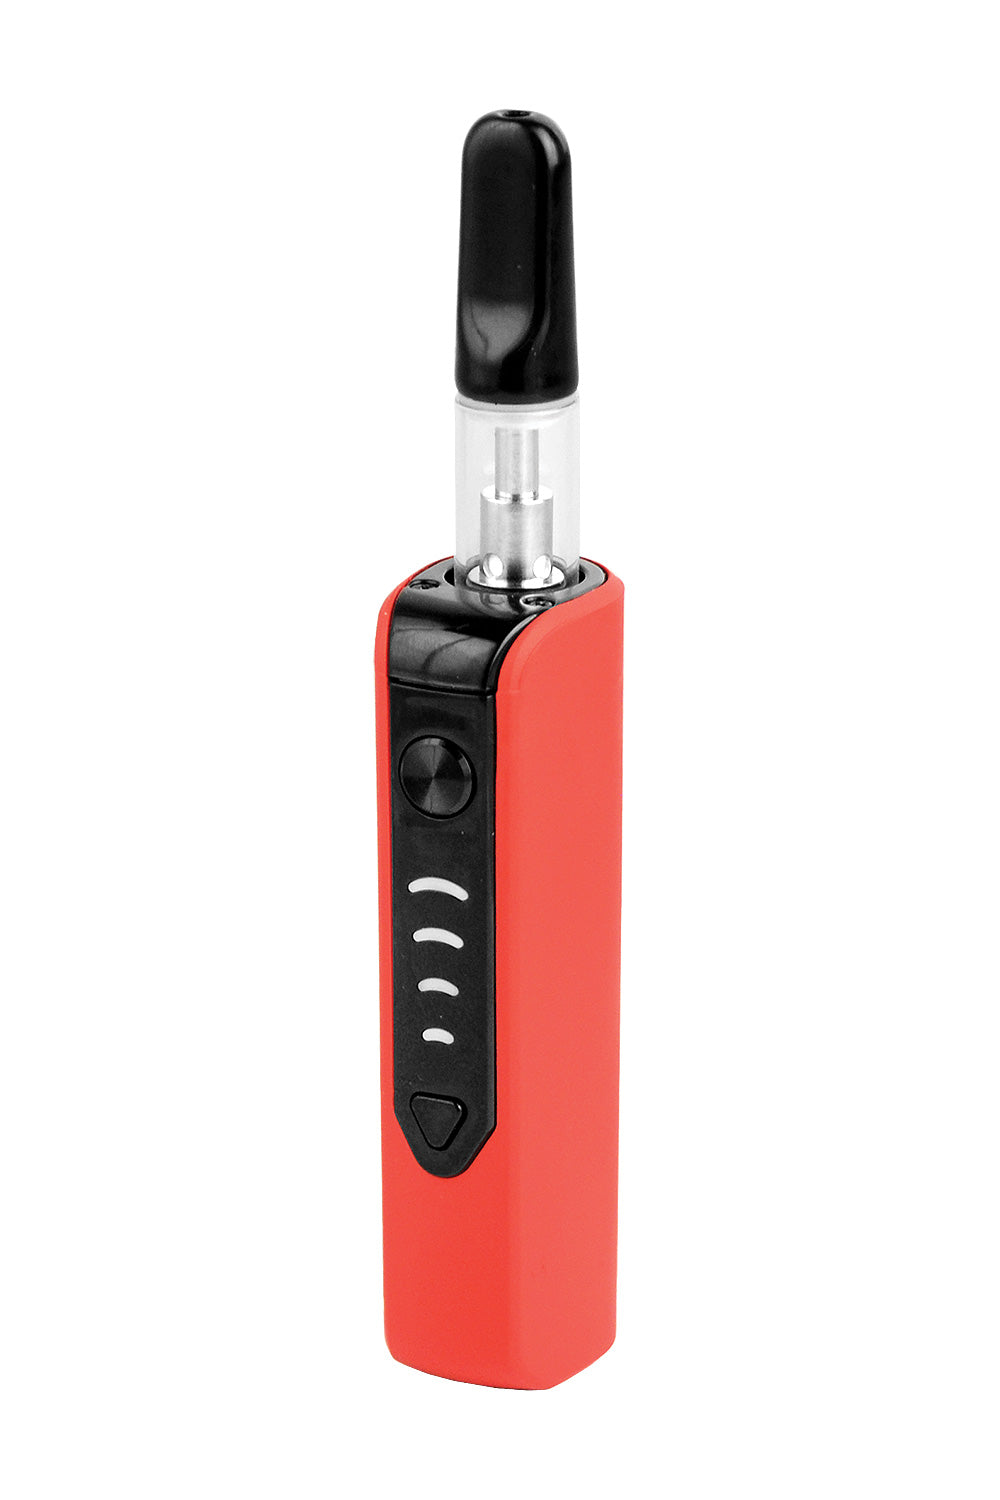 Pulsar Mobi Vaporizer in Red - Front View with Sleek Design